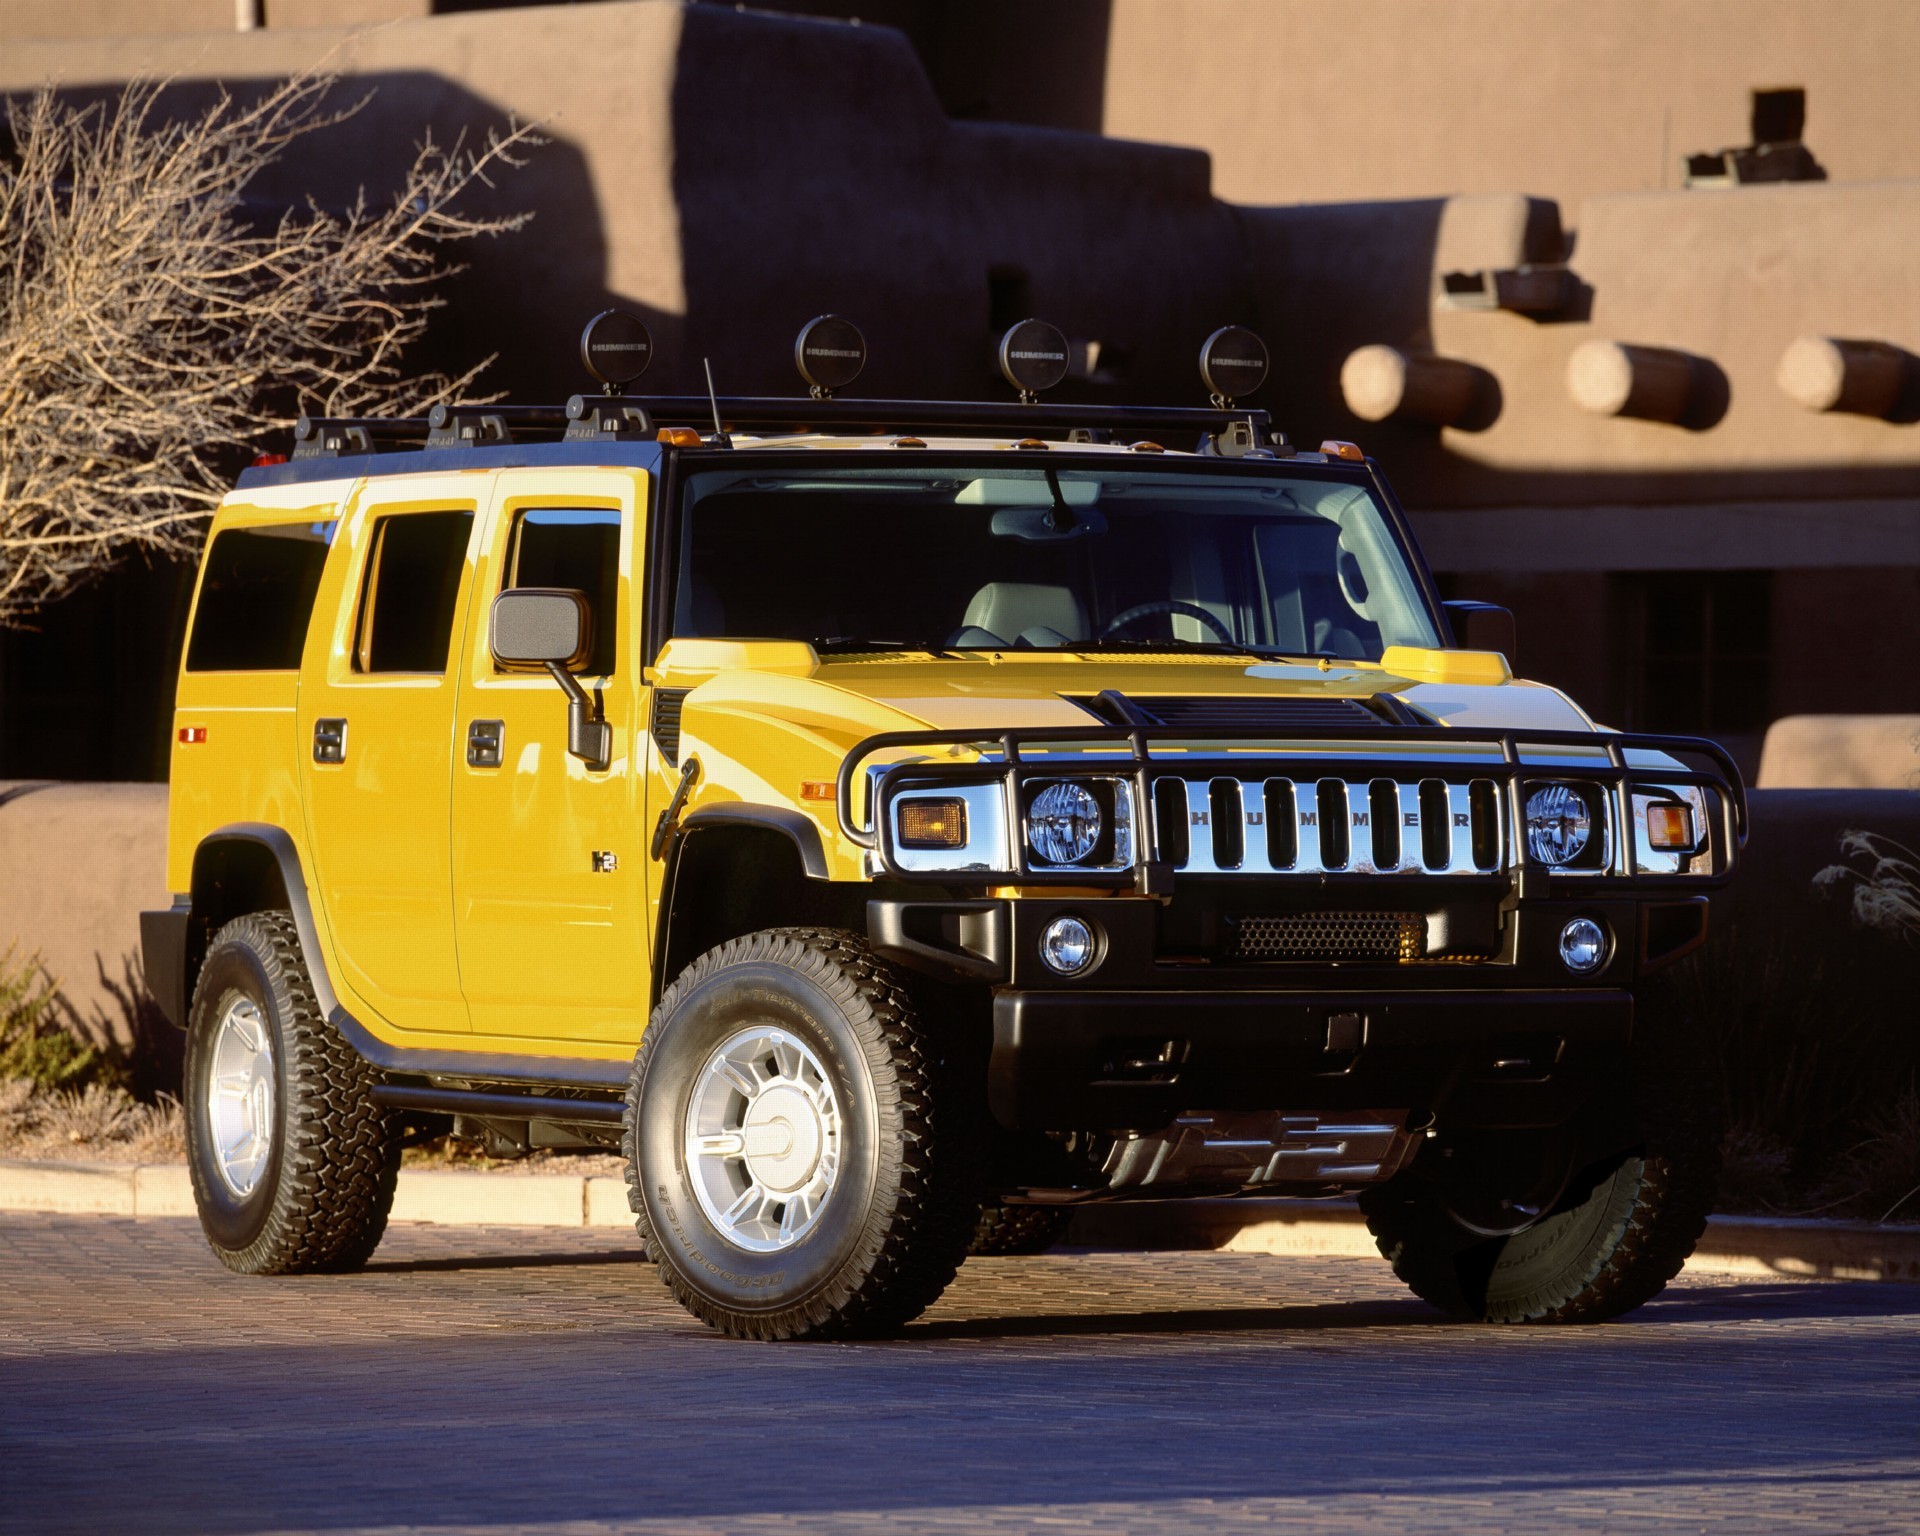 1920x1536 2007 Hummer H2 Pictures, History, Value, Research, News - conceptcarz.com